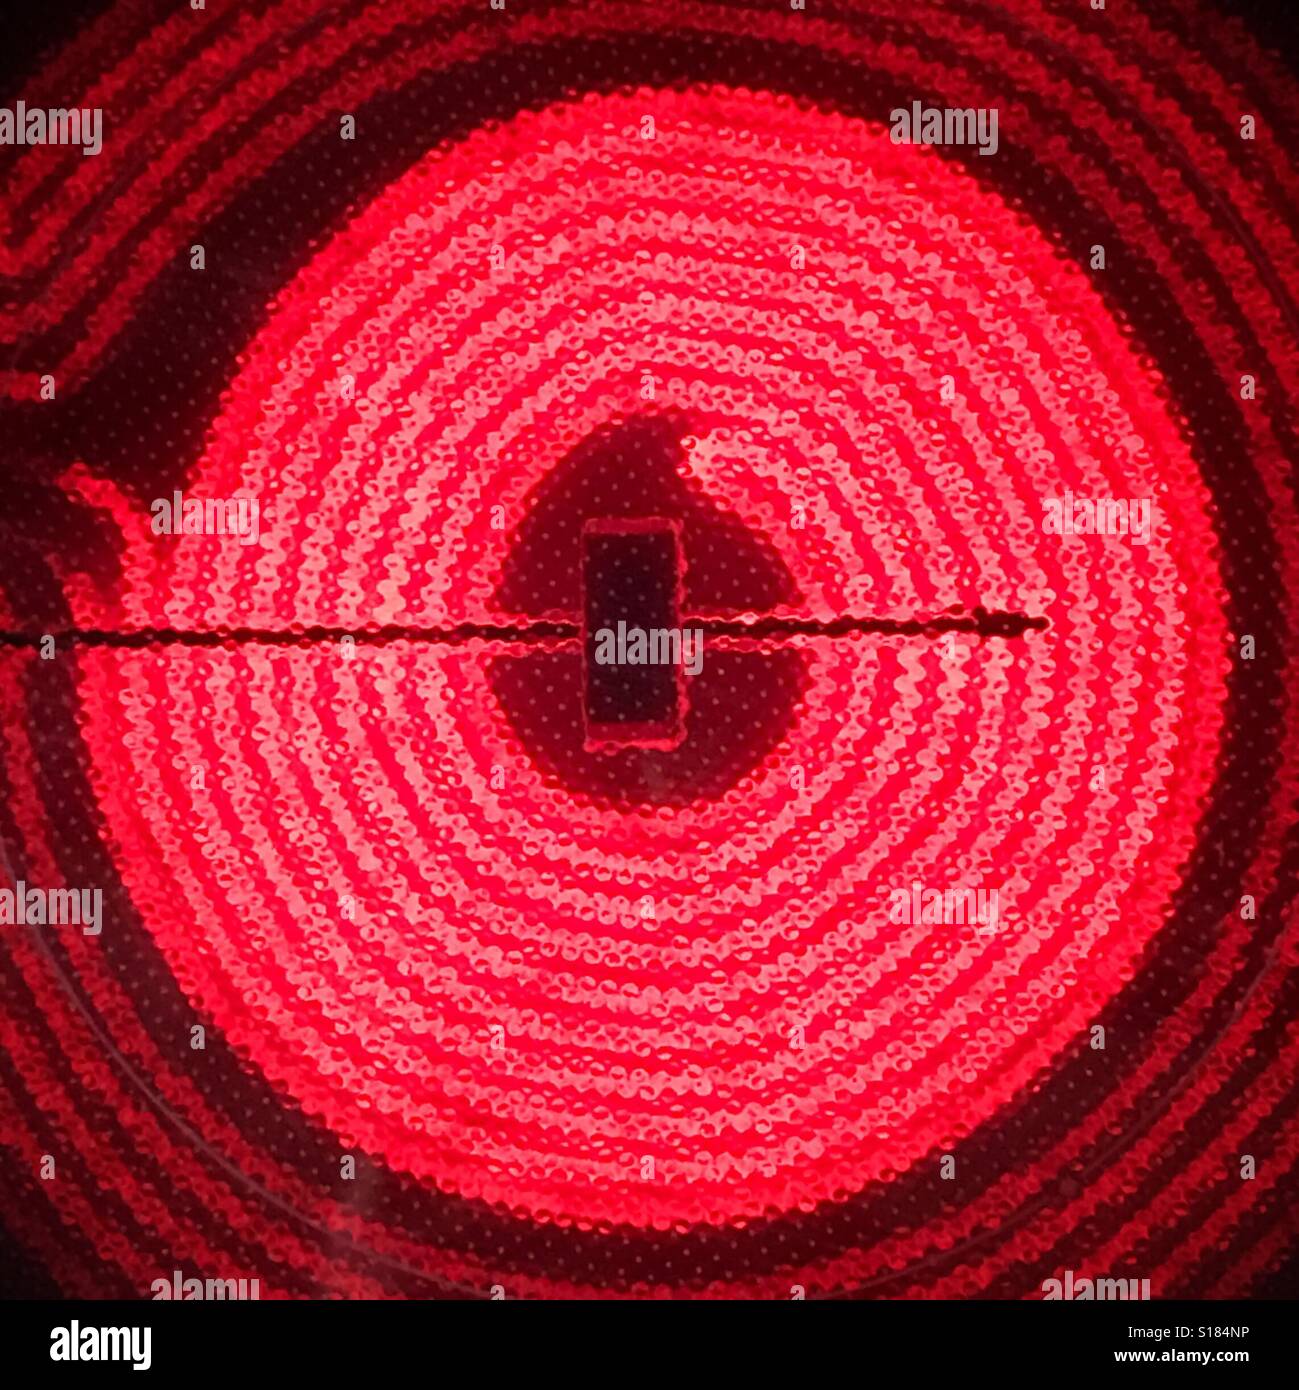 Circular heating element on a glass top stove glowing red Stock Photo